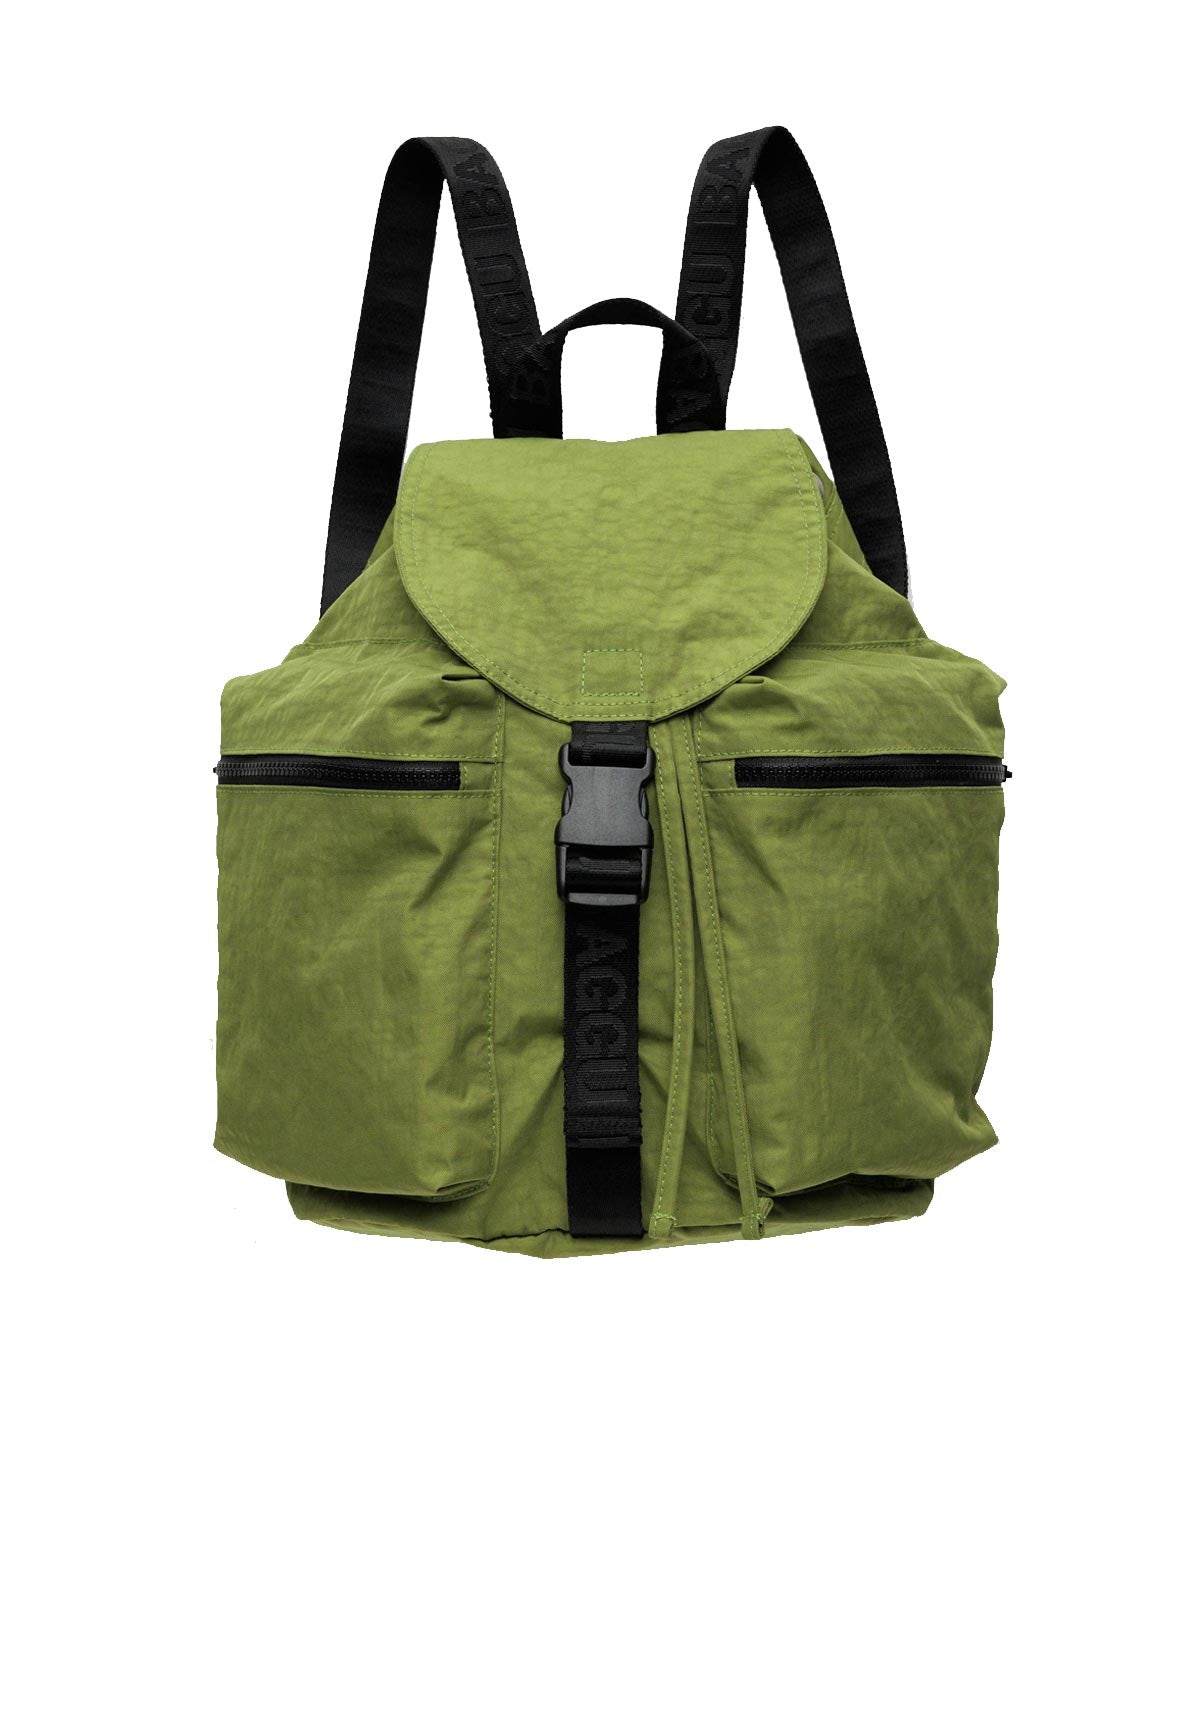 SMALL SPORT BACKPACK - Moeon